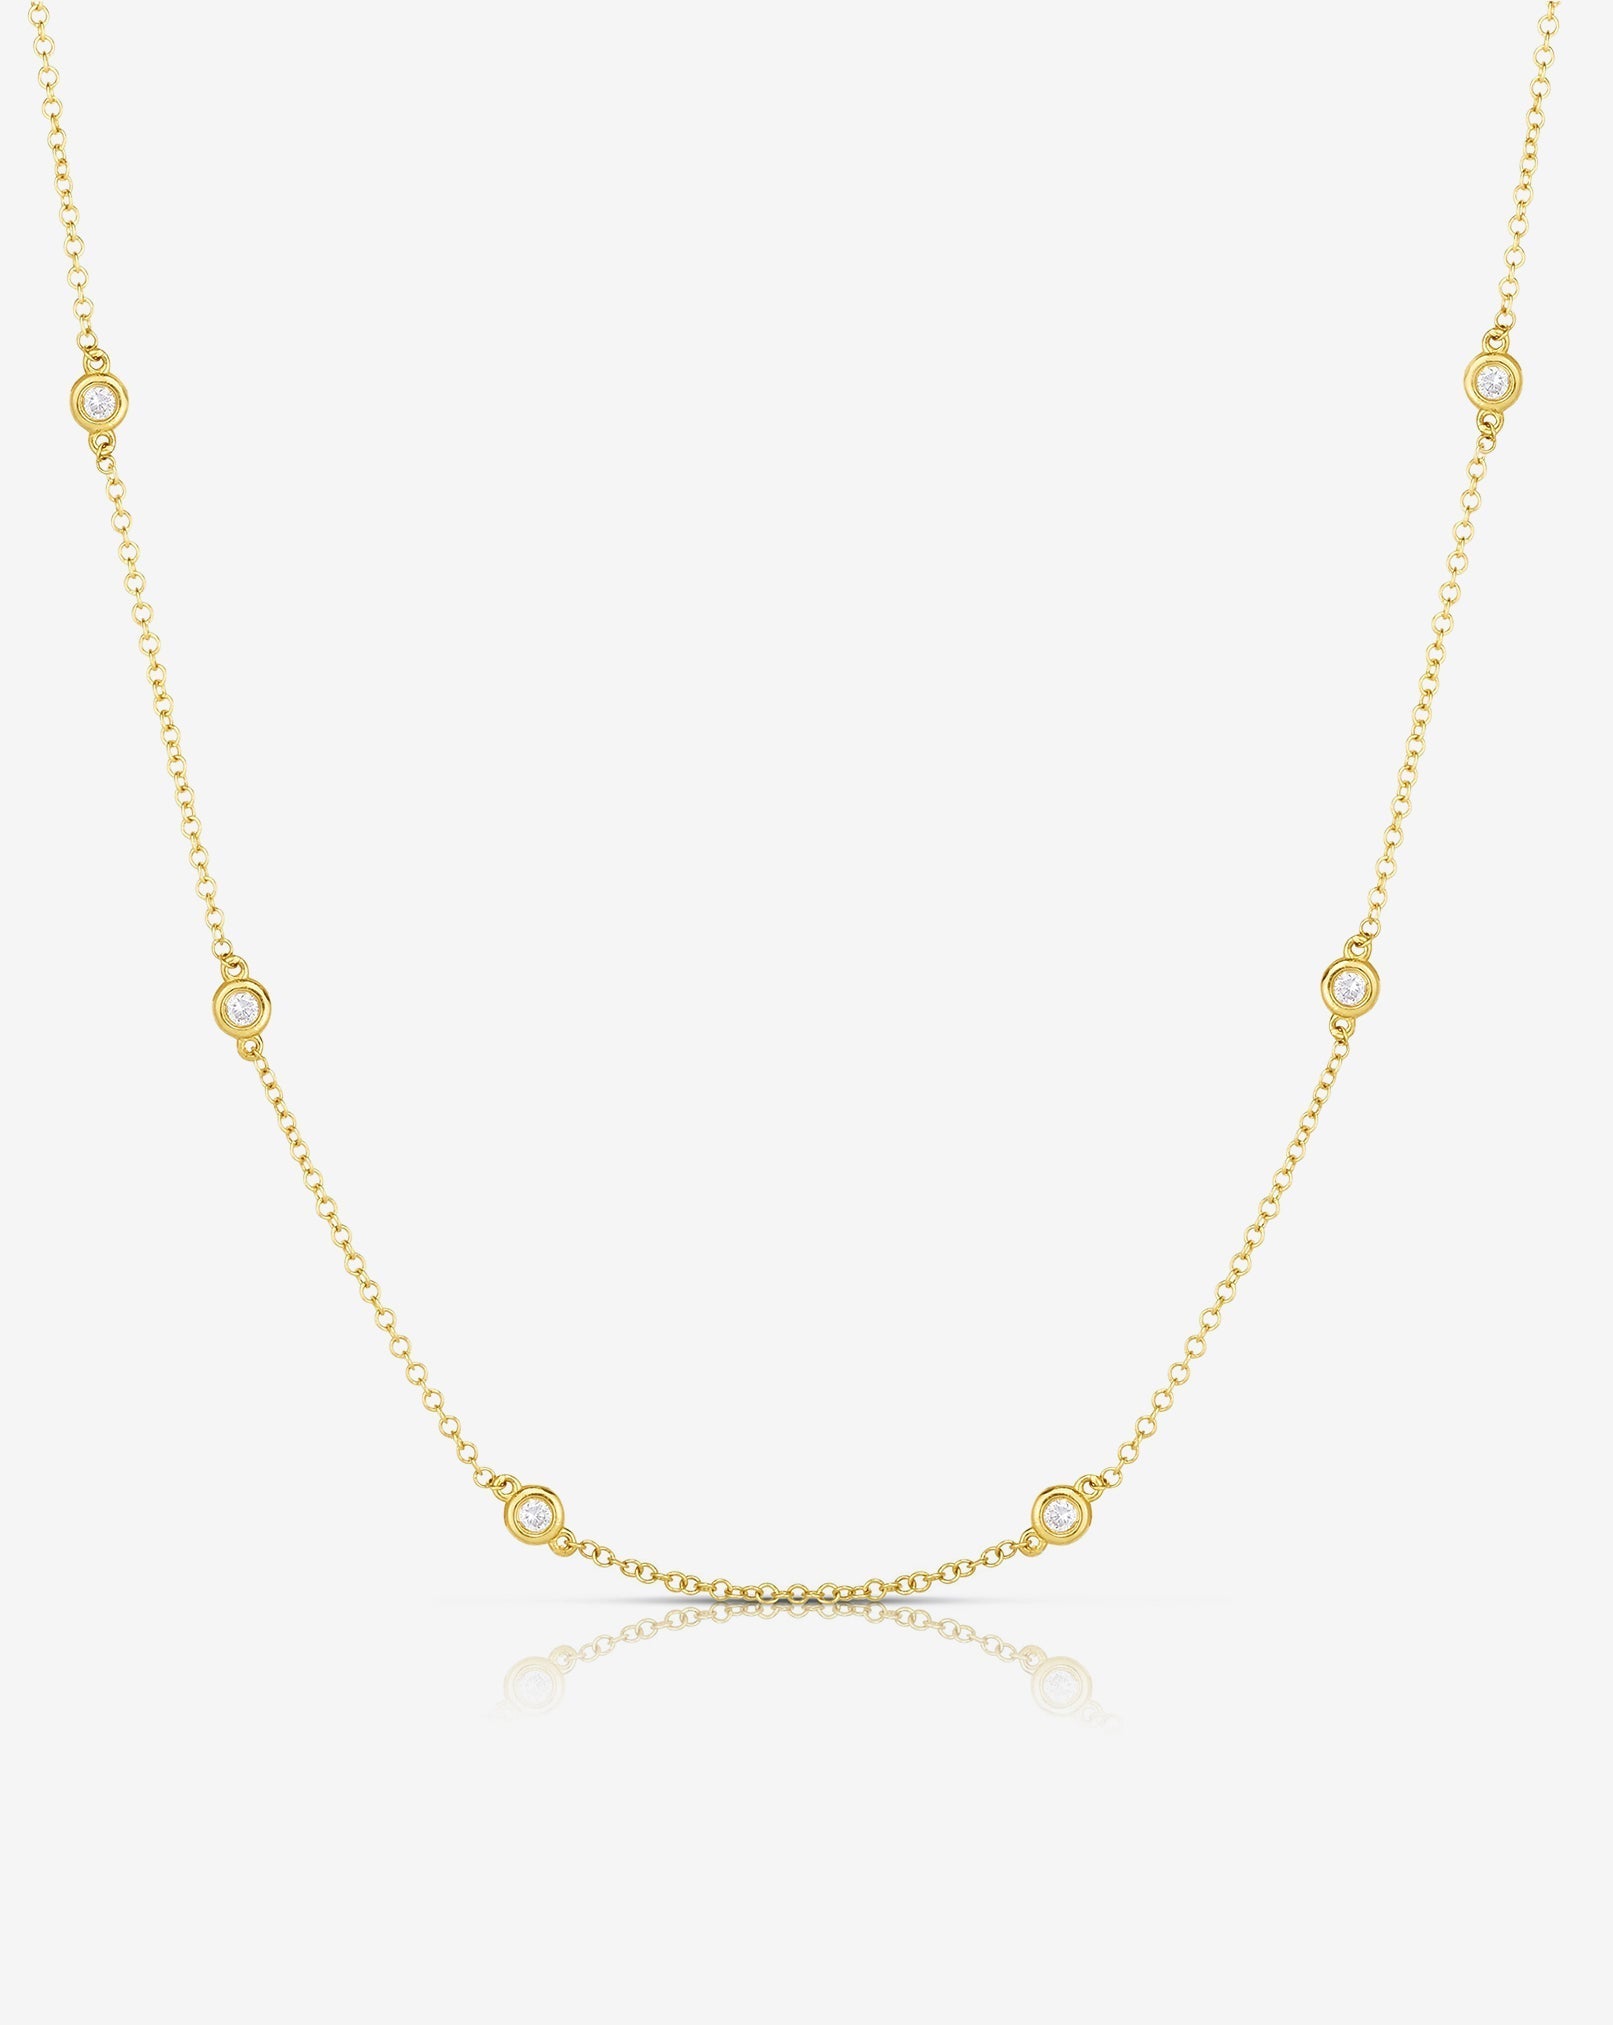 Flower Station Necklace - Rowena Necklace | Ana Luisa | Online Jewelry  Store At Prices You'll Love